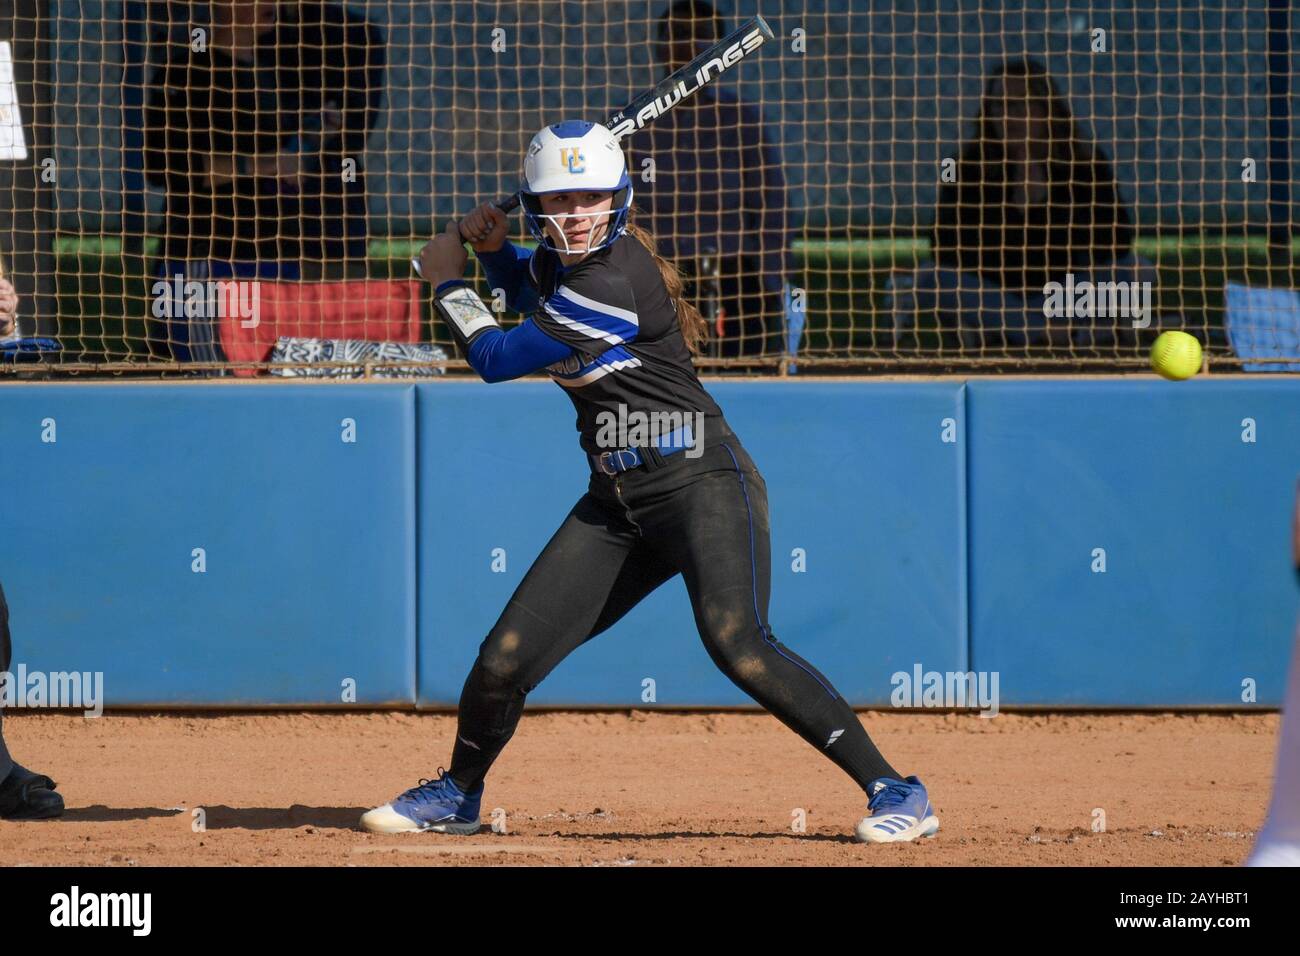 UC Riverside Highlanders infielder Marissa Burk (1) attempts to hit the ball during an NCAA softball game against Idaho State on Friday, Feb. 14, 2020 in Riverside, Calif. UC Riverside defeated Idaho 2-1. (Photo by IOS/ESPA-Images) Stock Photo